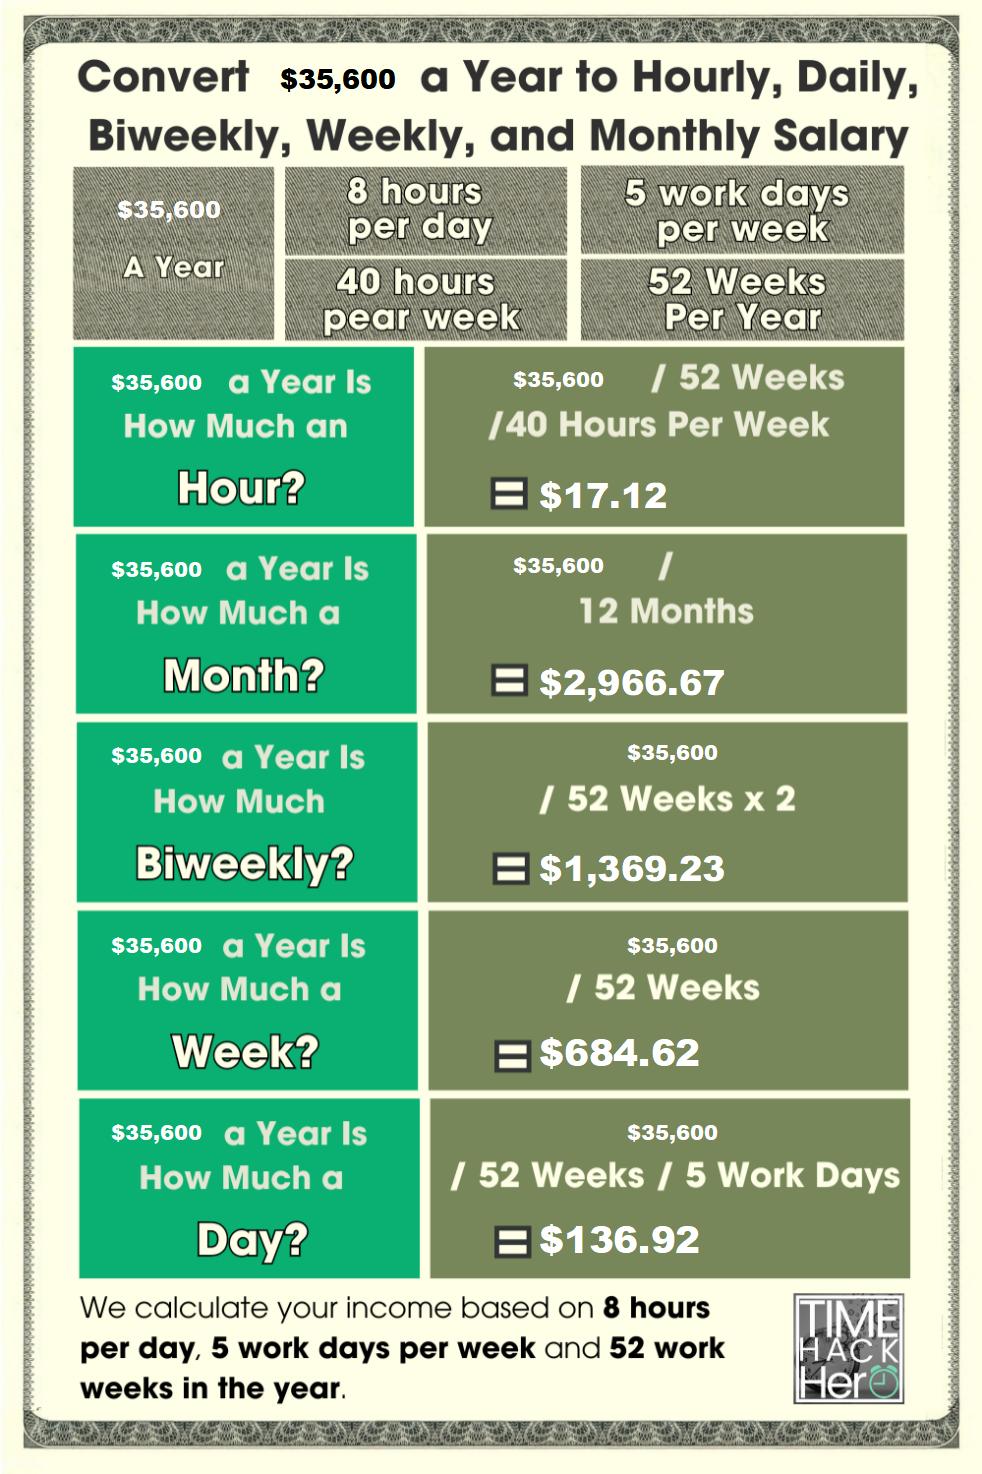 Convert $35600 a Year to Hourly, Daily, Biweekly, Weekly, and Monthly Salary